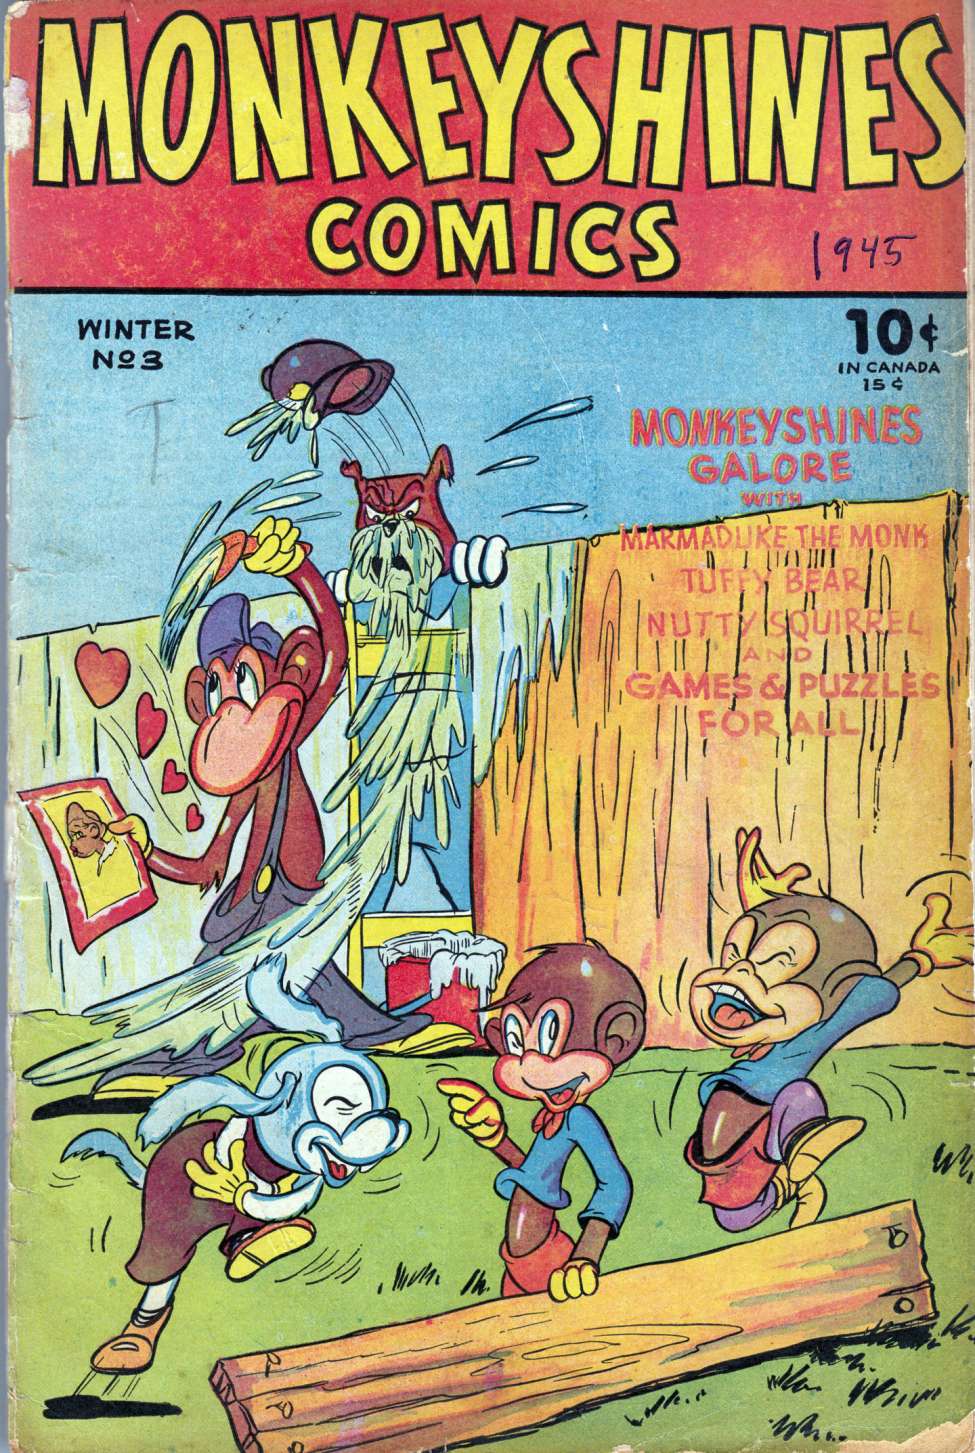 Book Cover For Monkeyshines Comics 3